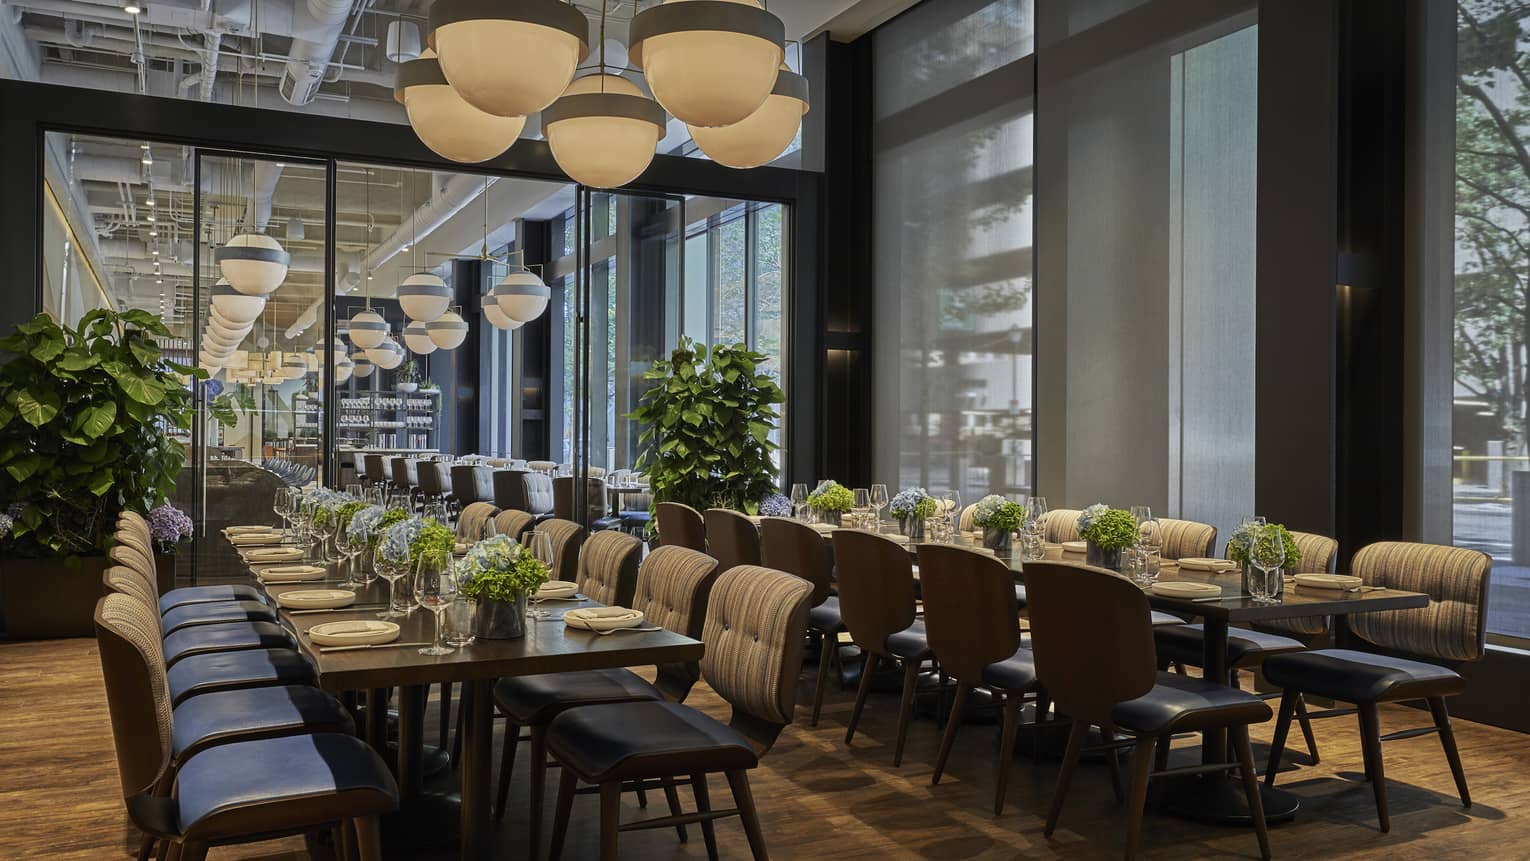 Two long tables are set with plates and white floral arrangements in Vernick Restaurant in Four Seasons Philadelphia 